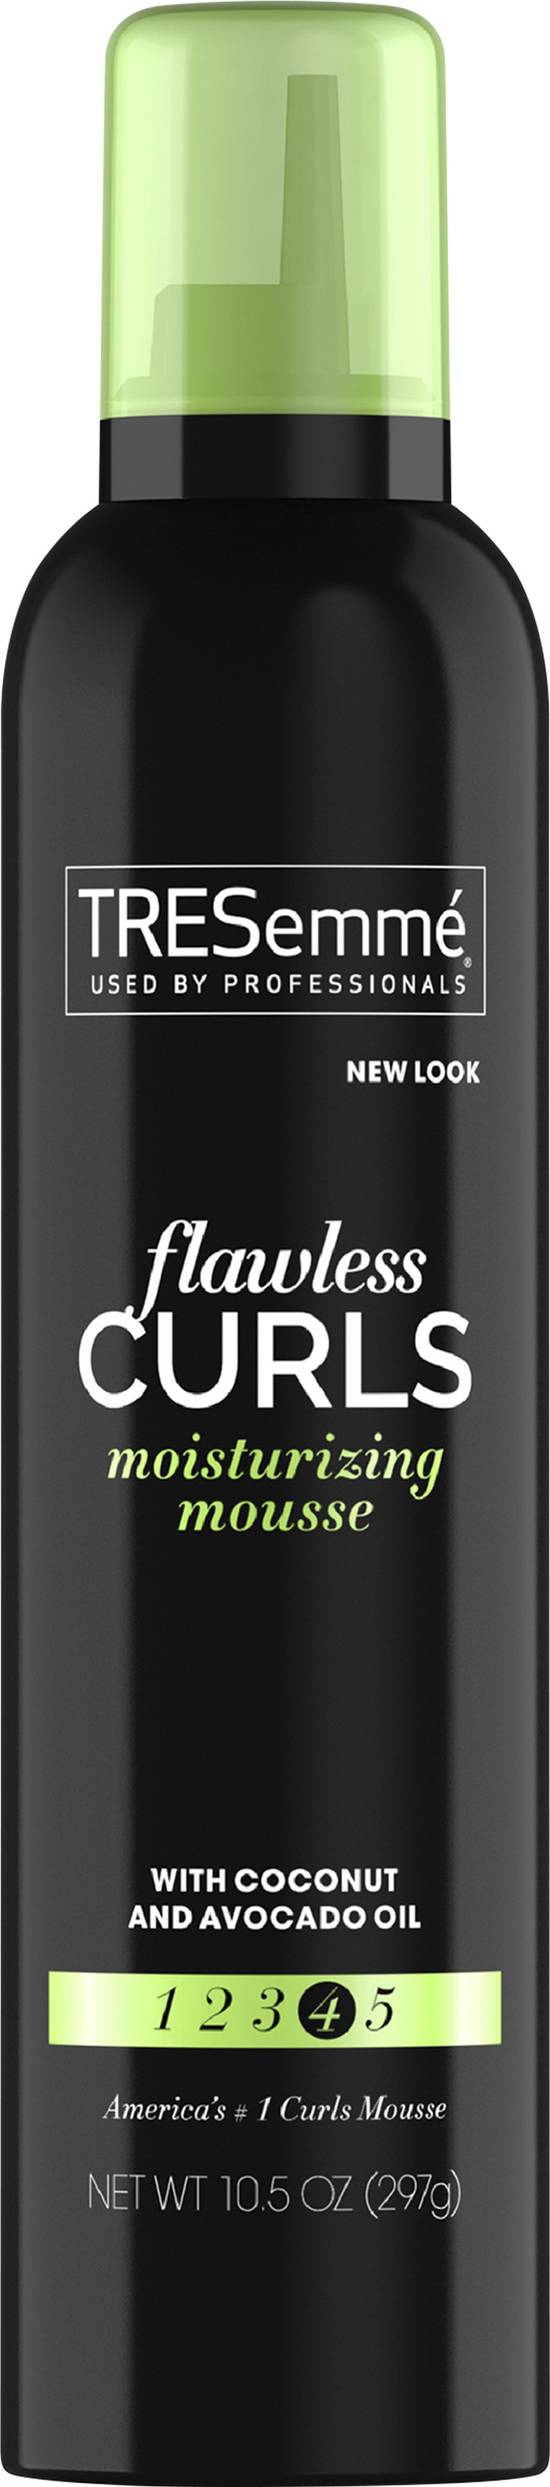 Tresemmé Flawless Curls Moisturizing Mousse With Coconut and Avocado Oil